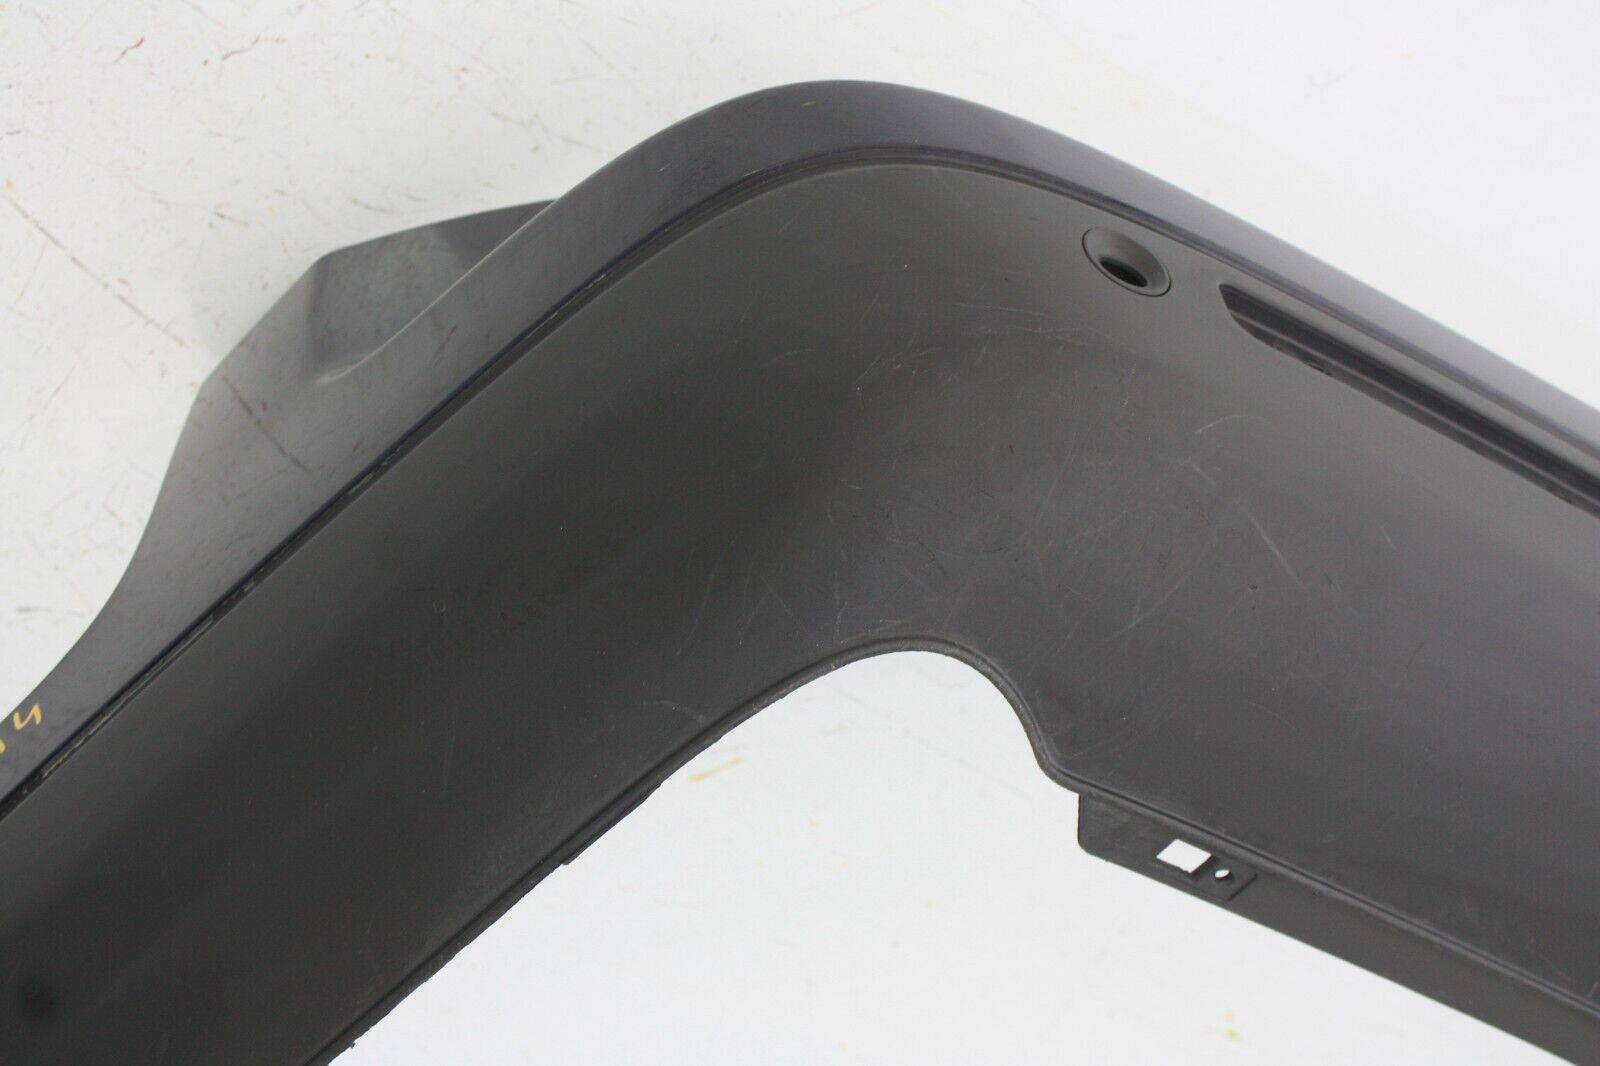 Land-Rover-Discovery-Rear-Bumper-2009-TO-2013-9H22-17D822-A-Genuine-175701279737-13